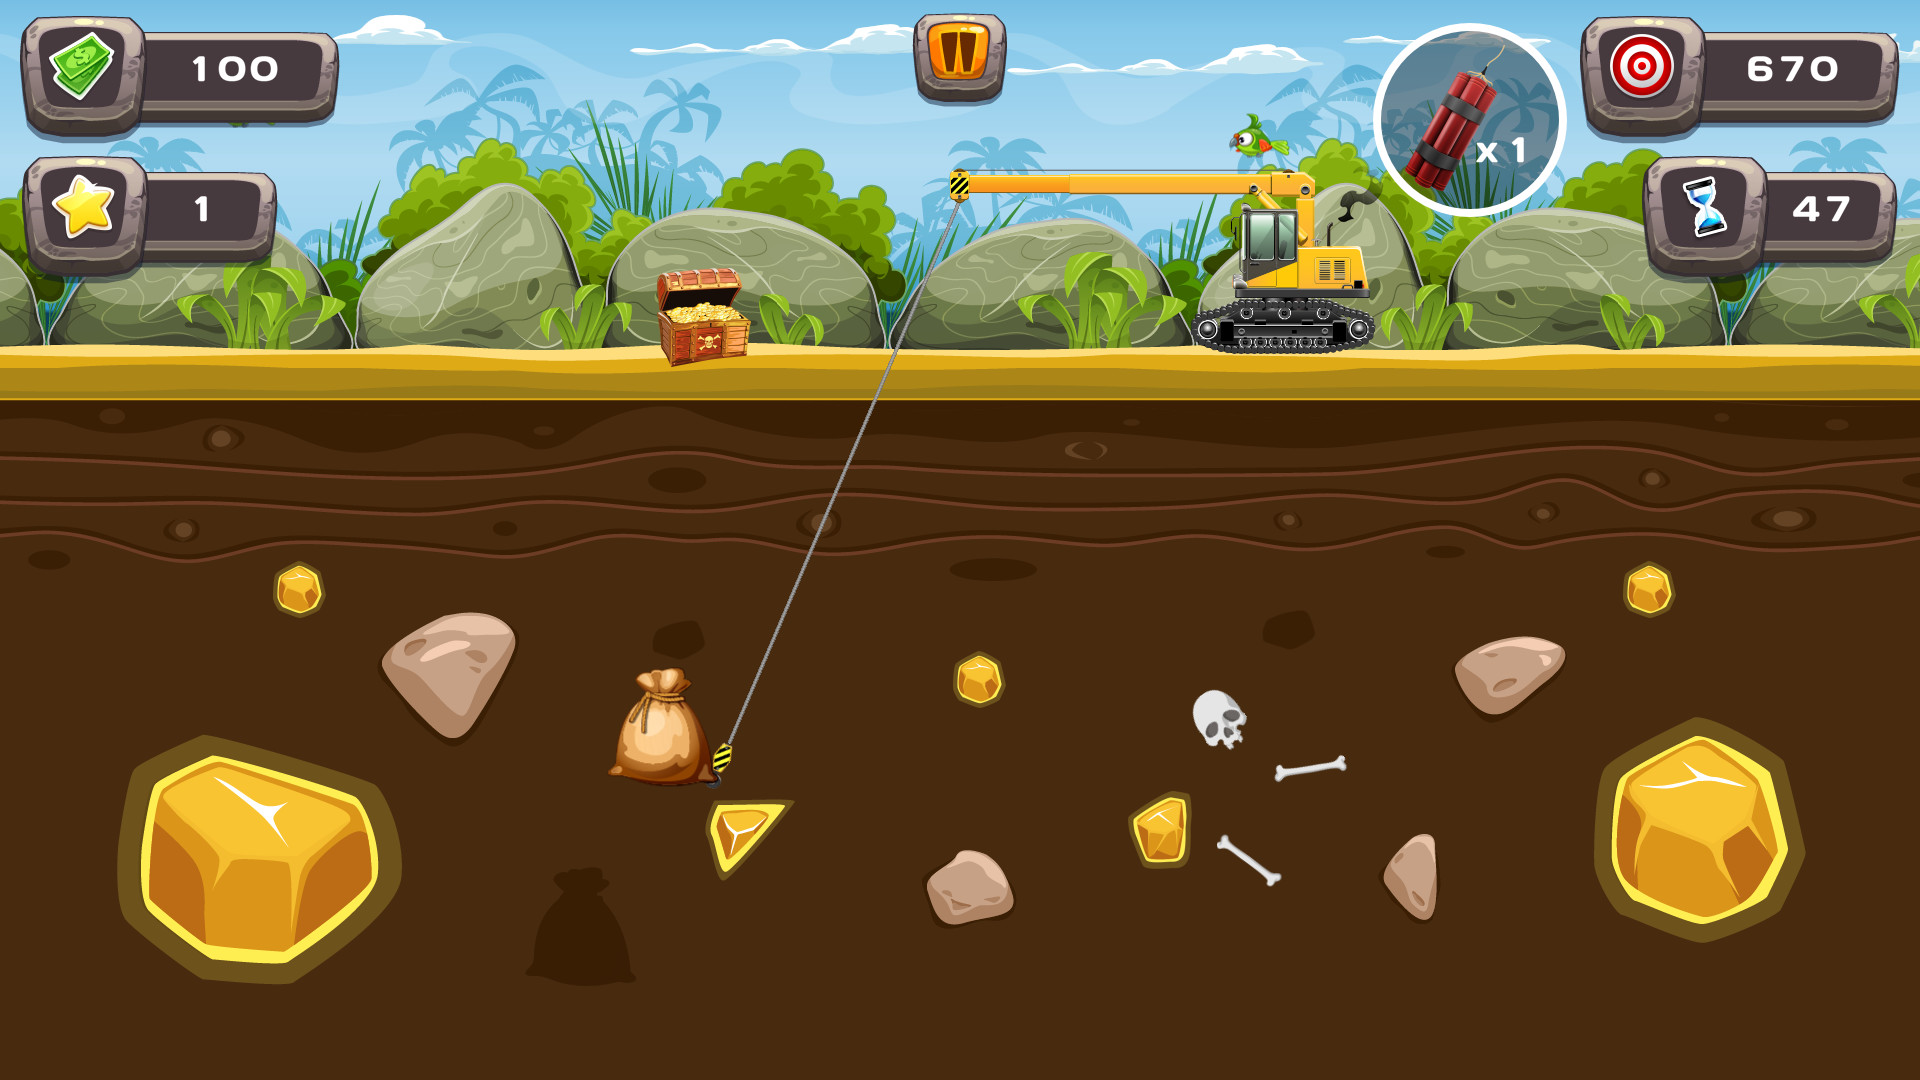 Play Gold Miner Online For Free 